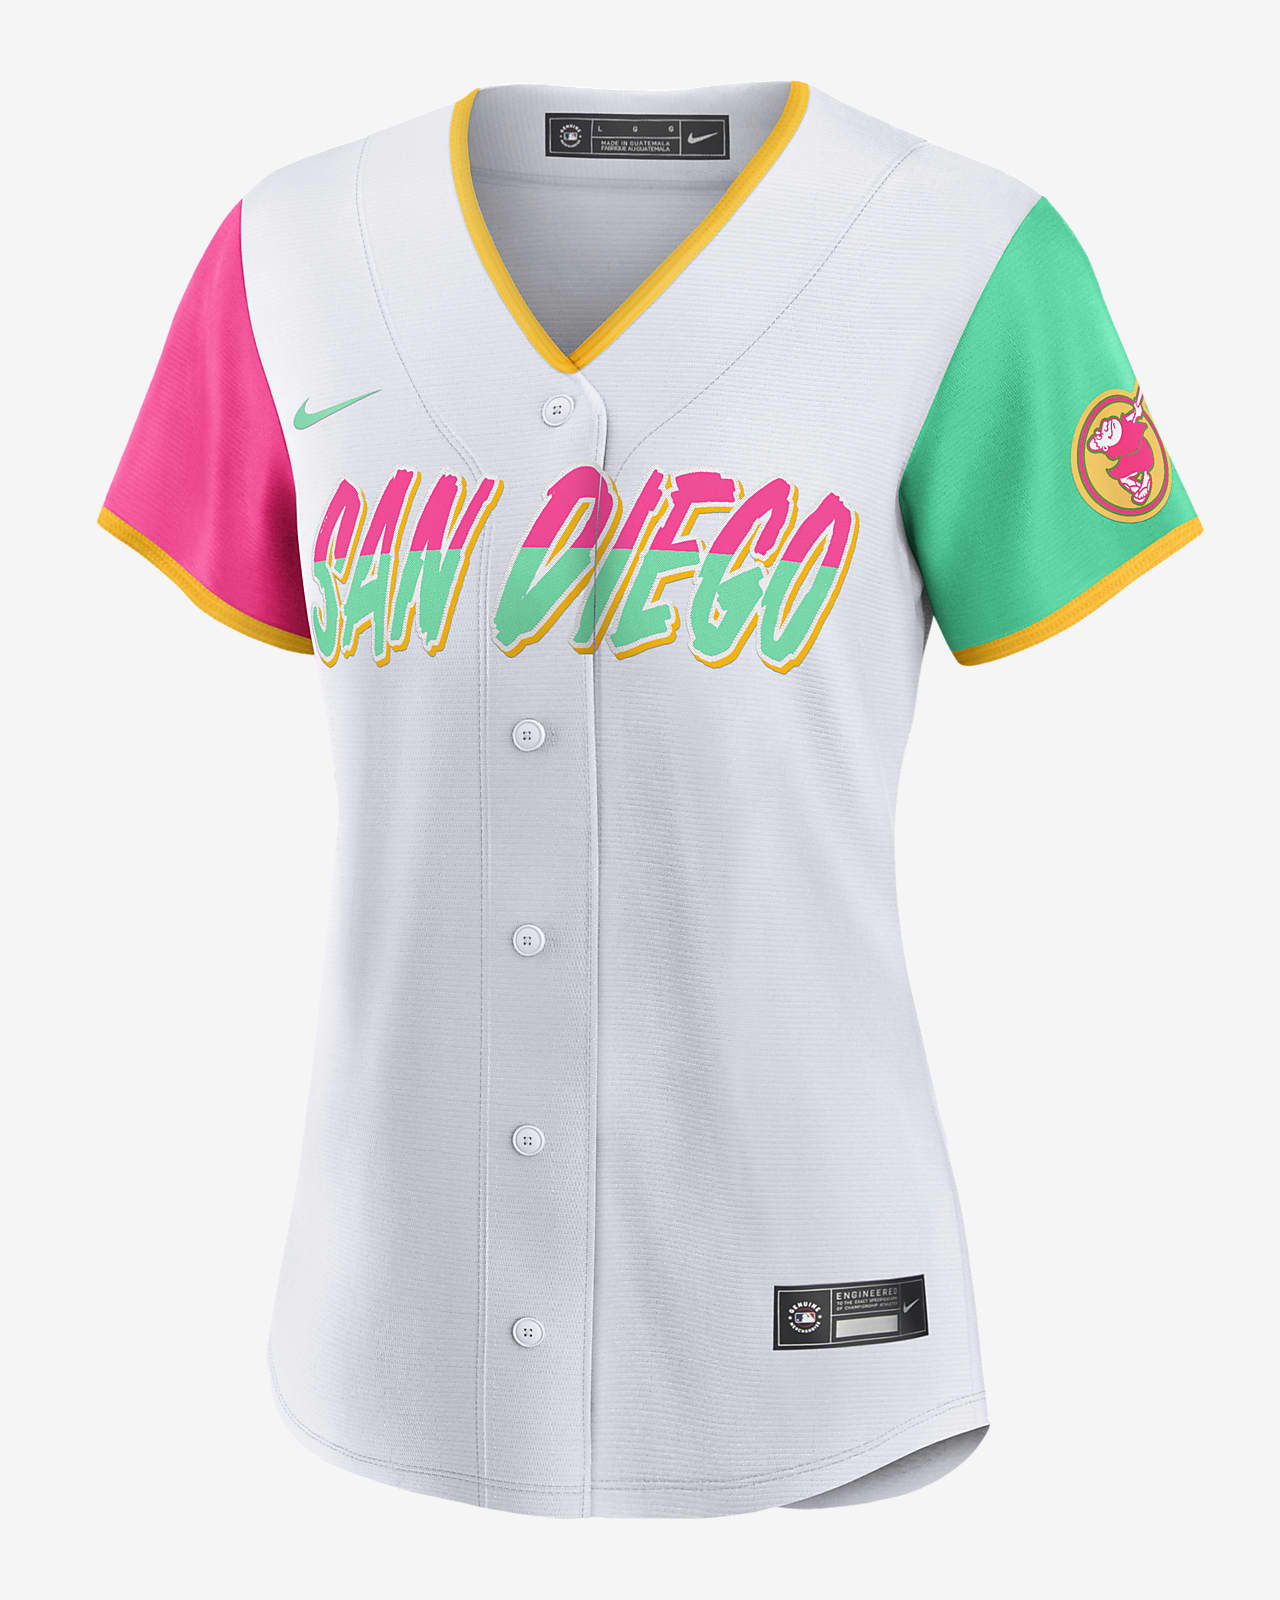 san diego padres connect jersey